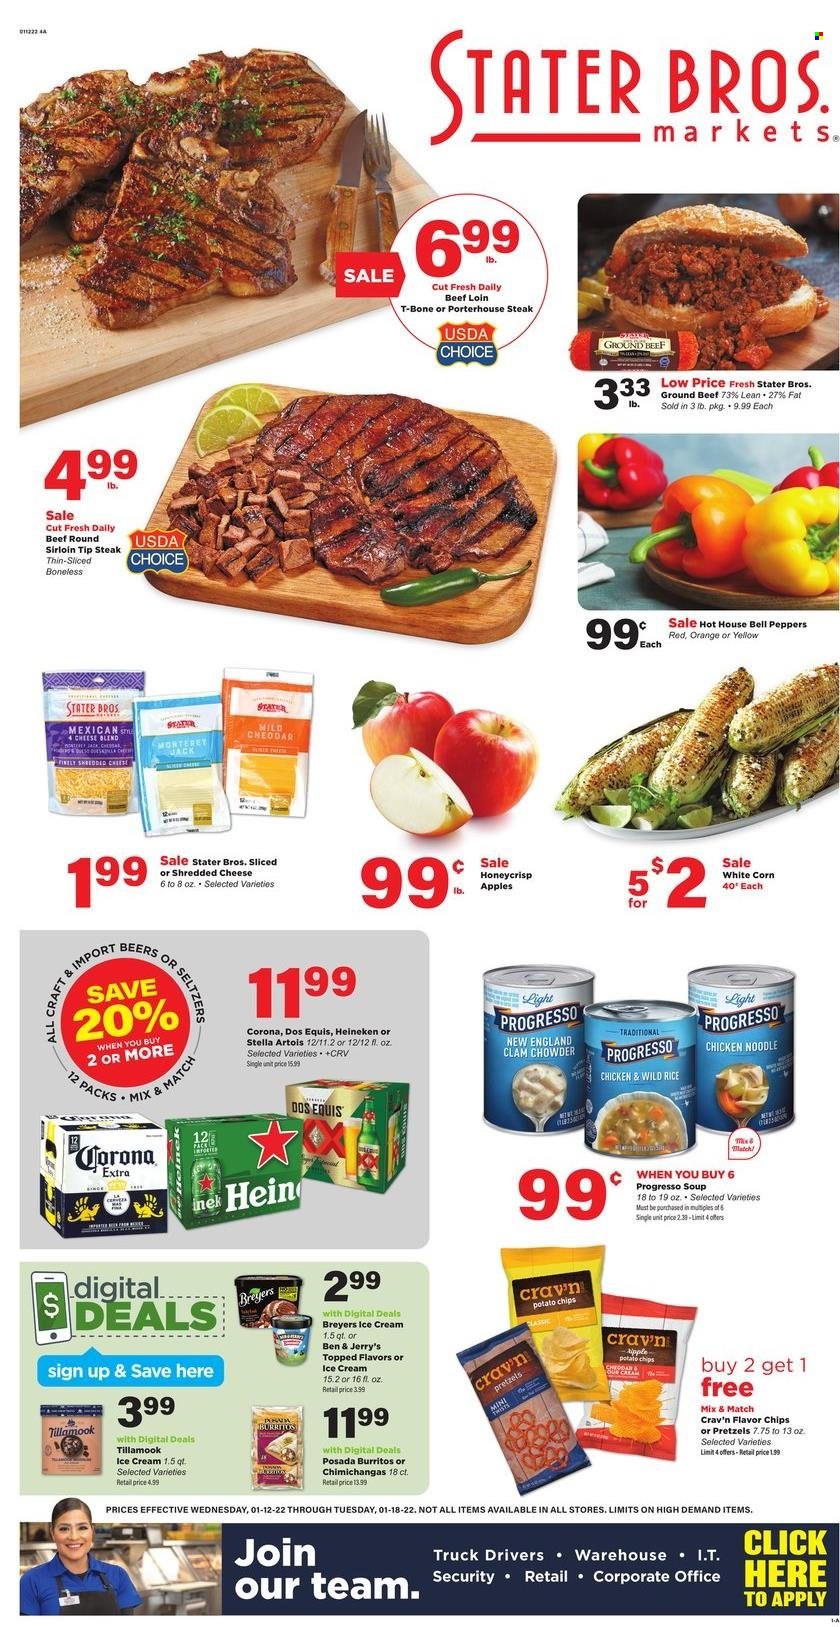 thumbnail - Stater Bros. Flyer - 01/12/2022 - 01/18/2022 - Sales products - pretzels, bell peppers, corn, peppers, apples, oranges, burrito, noodles, Progresso, shredded cheese, ice cream, Ben & Jerry's, chips, clam chowder, rice, beer, Corona Extra, Heineken, beef meat, ground beef, t-bone steak, steak, Stella Artois, Dos Equis. Page 1.